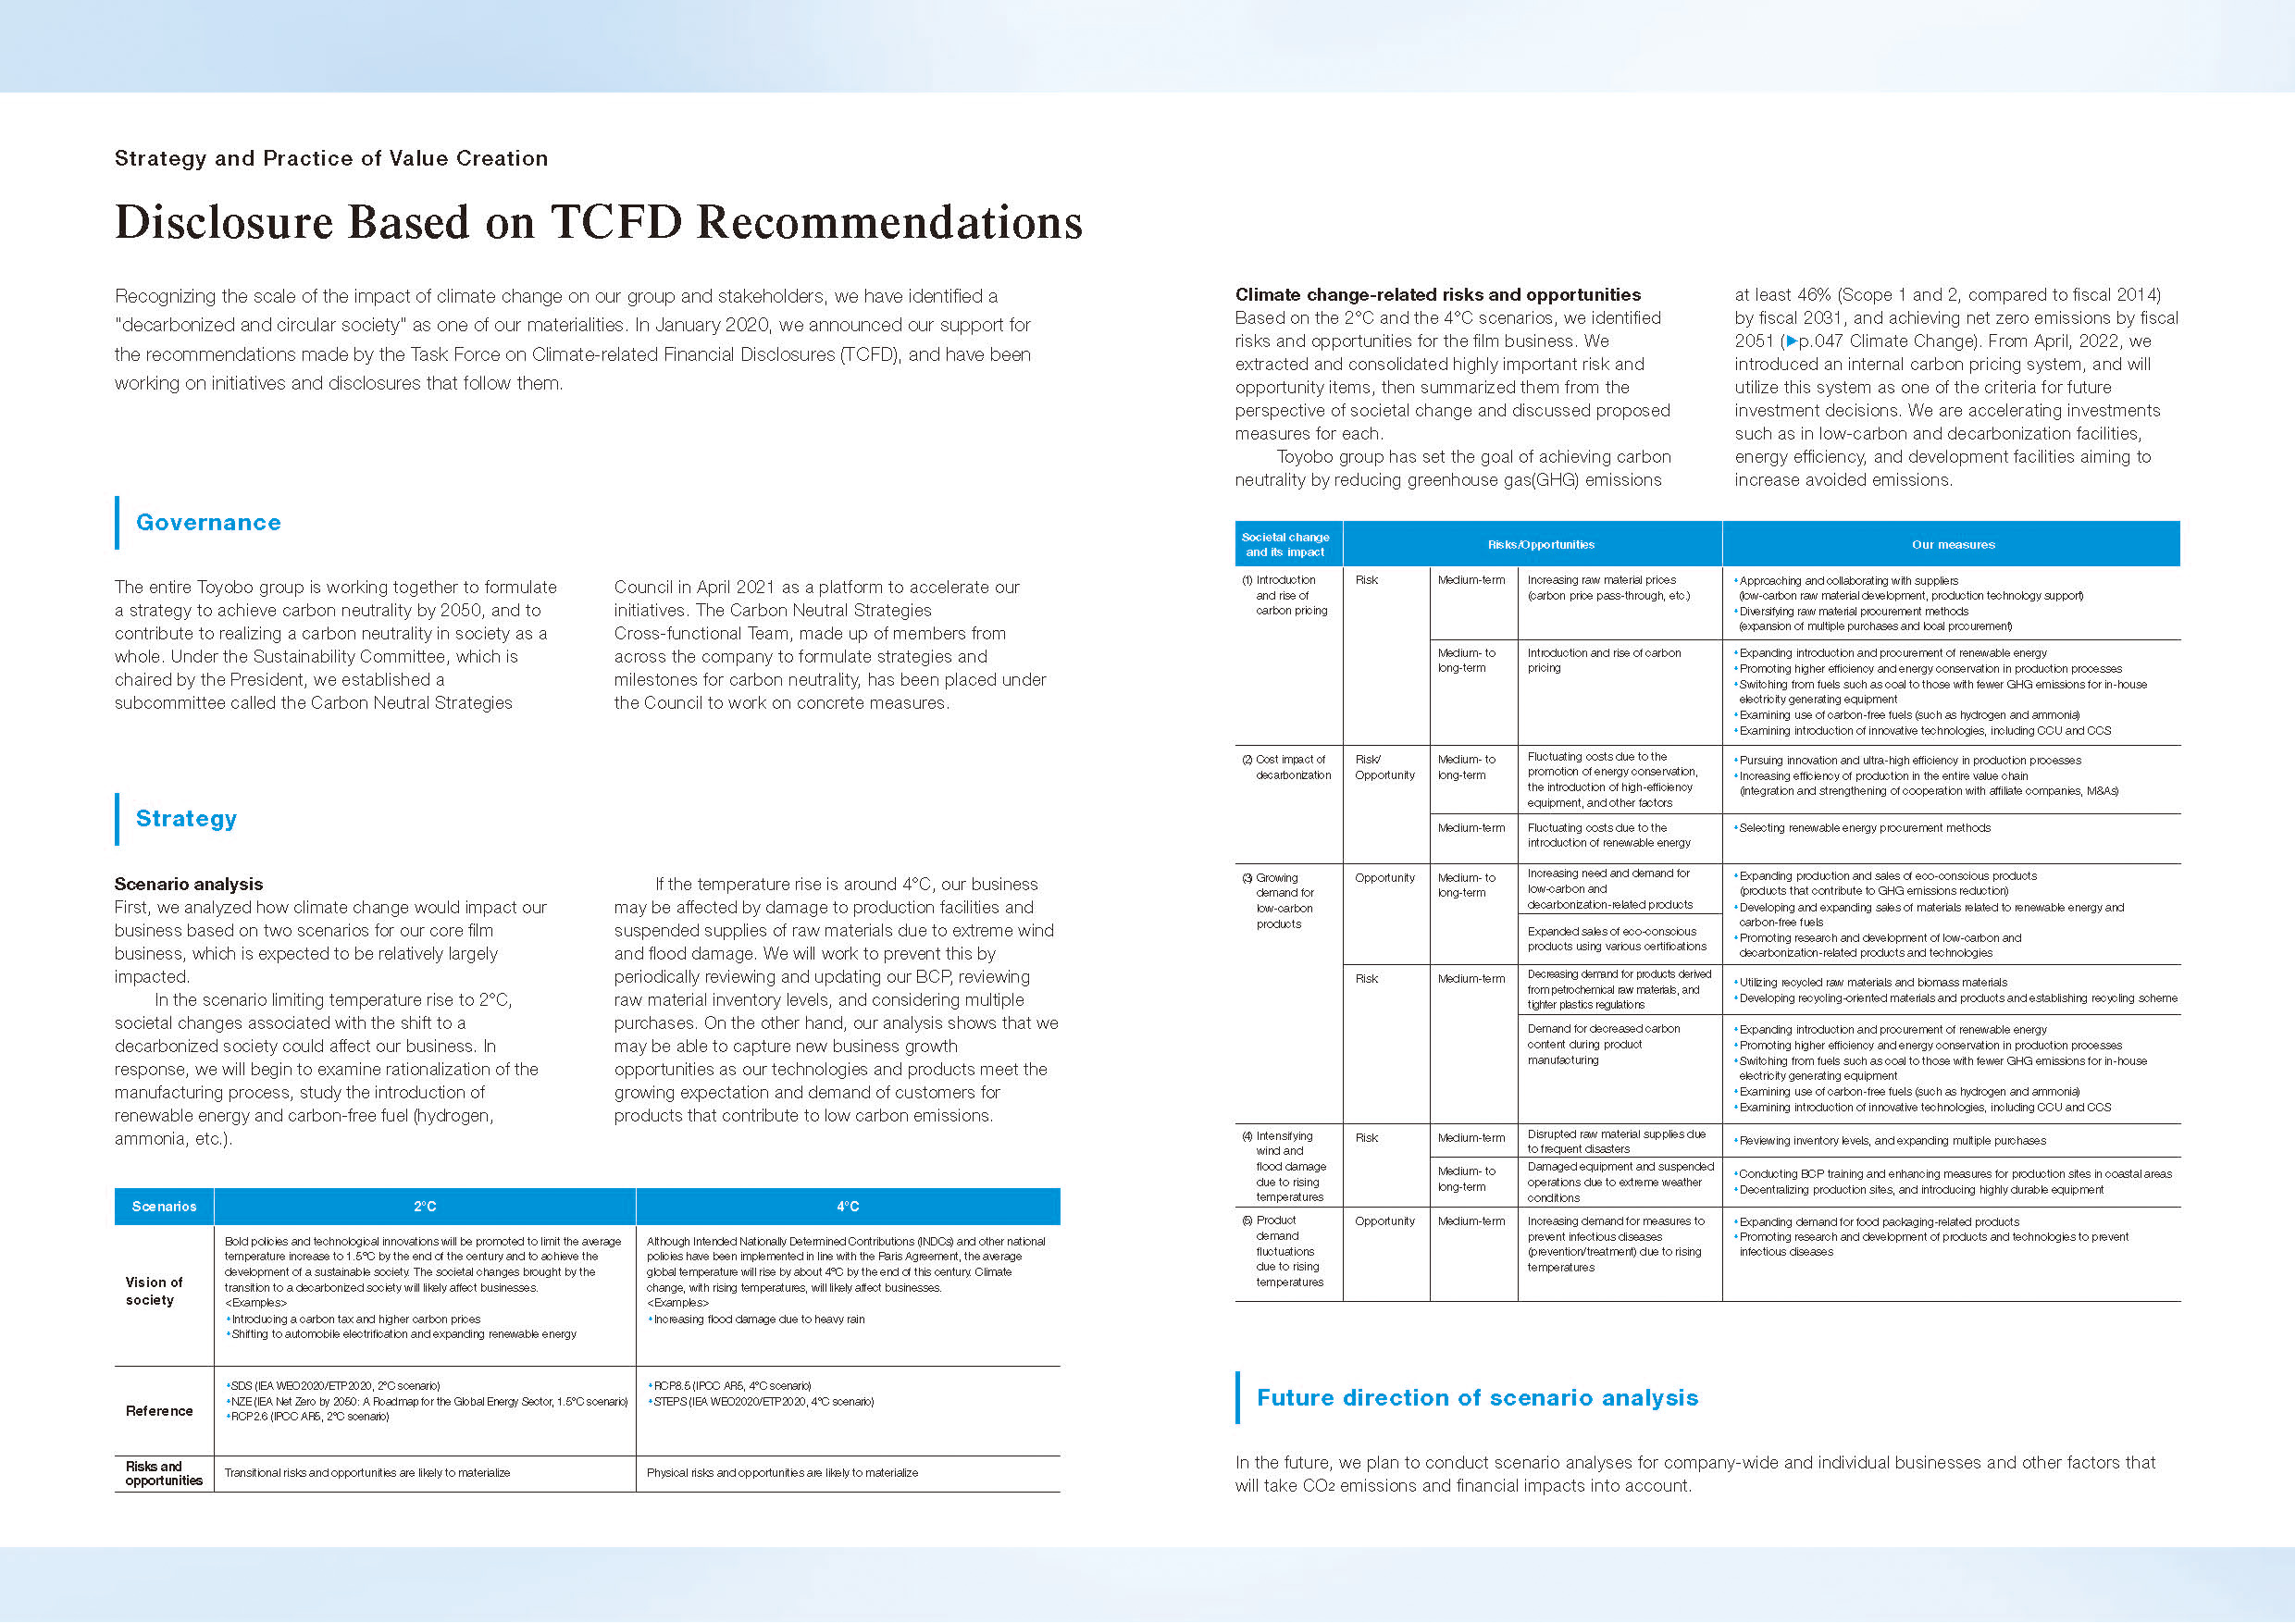 Find more information about our disclosure based on TCFD recommendations (PDF)